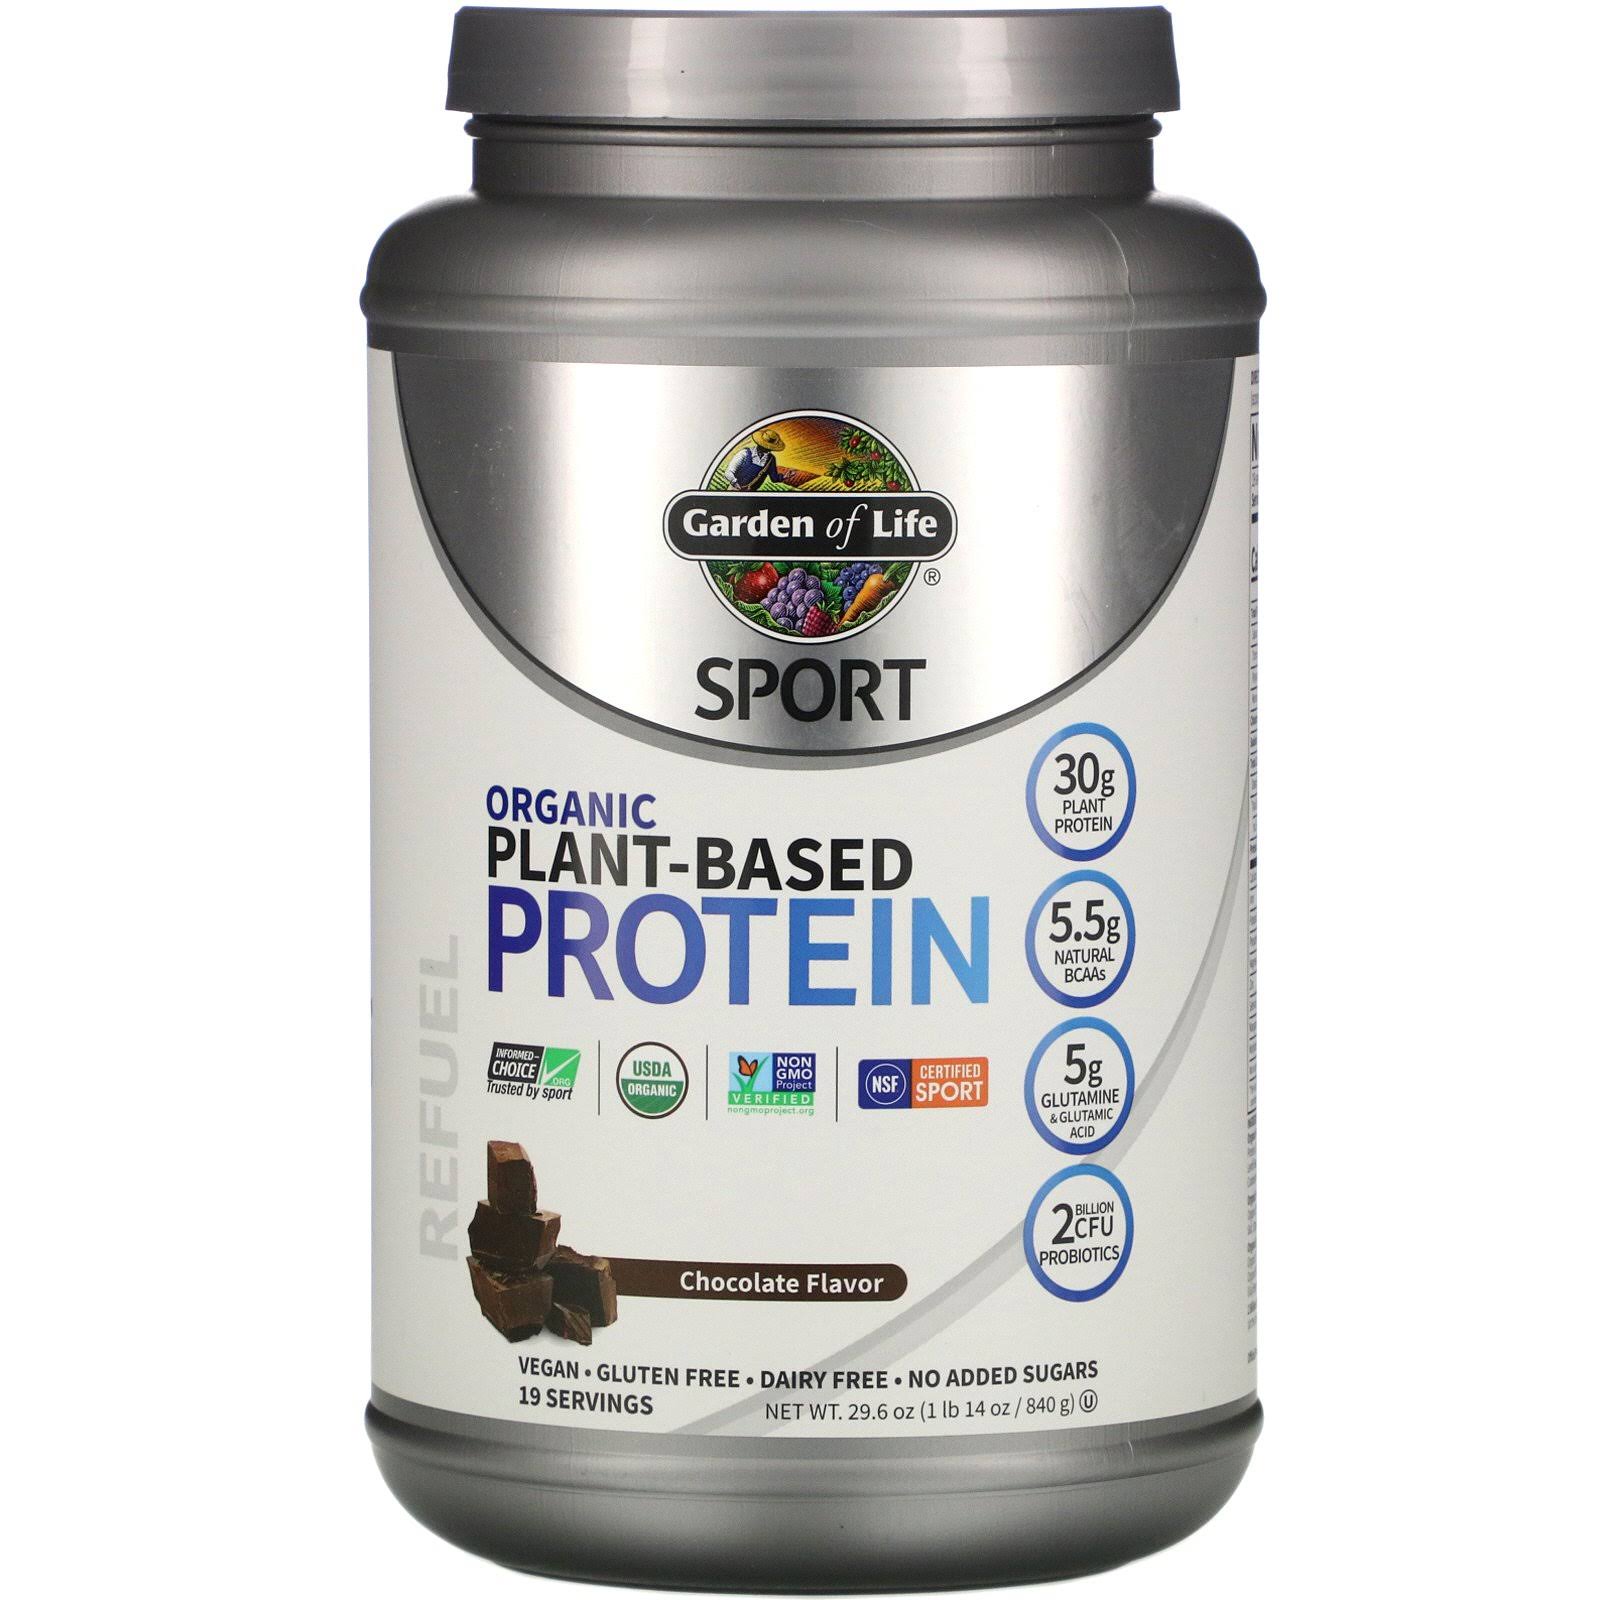 Garden of Life Sport Organic Plant-Based Protein Supplement - Chocolate, 38 Servings